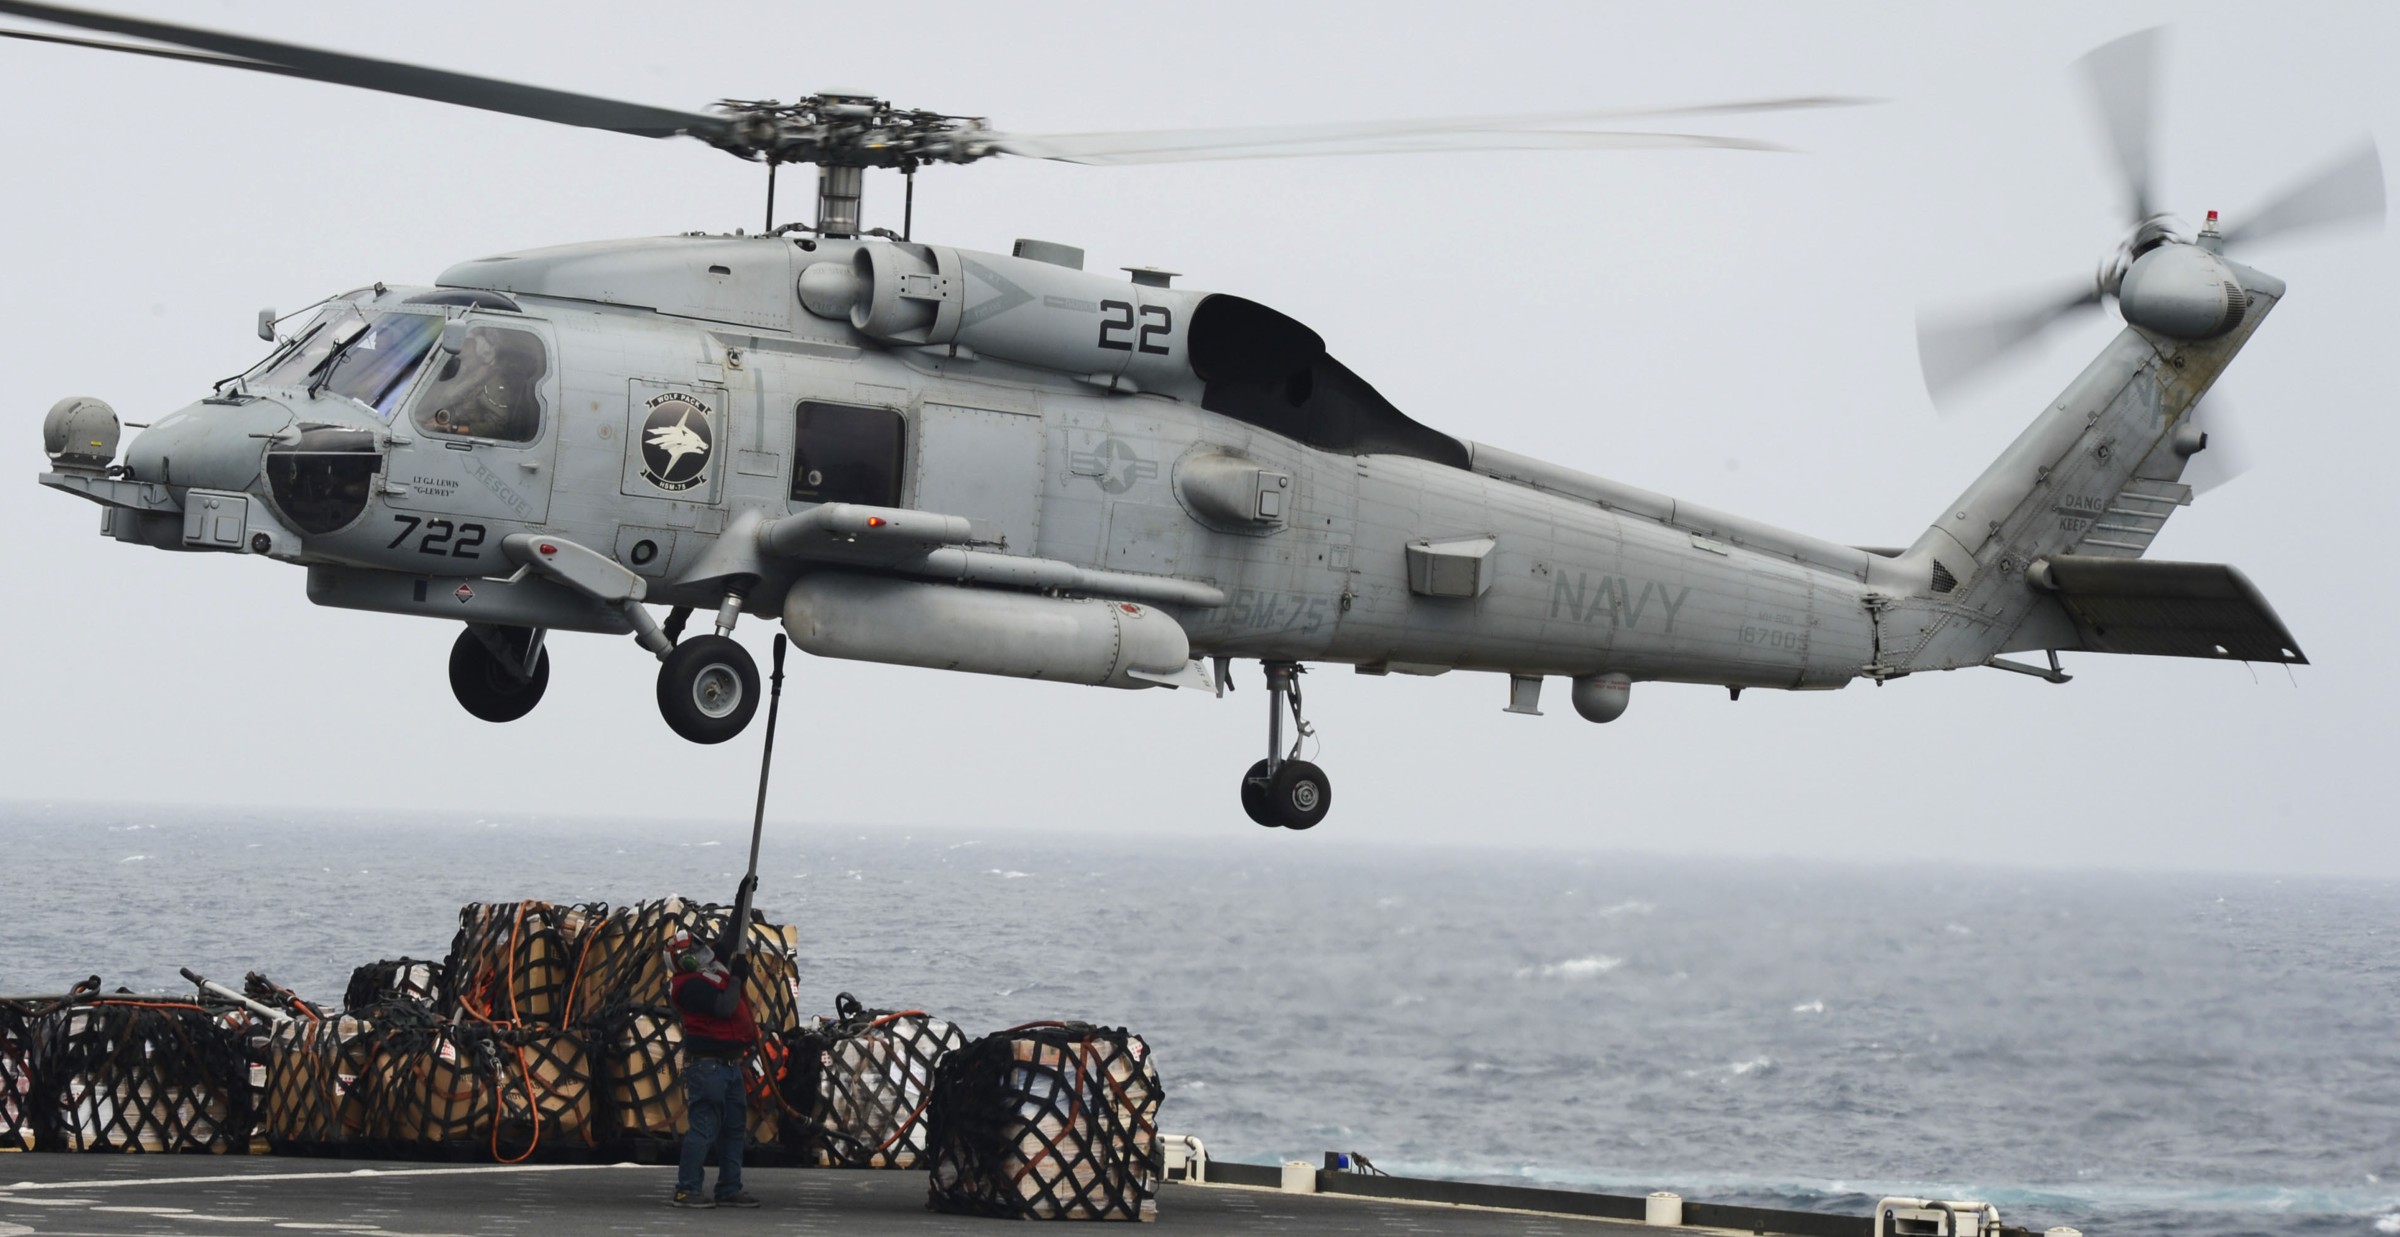 hsm-75 wolfpack helicopter maritime strike squadron us navy mh-60r seahawk 2013 59